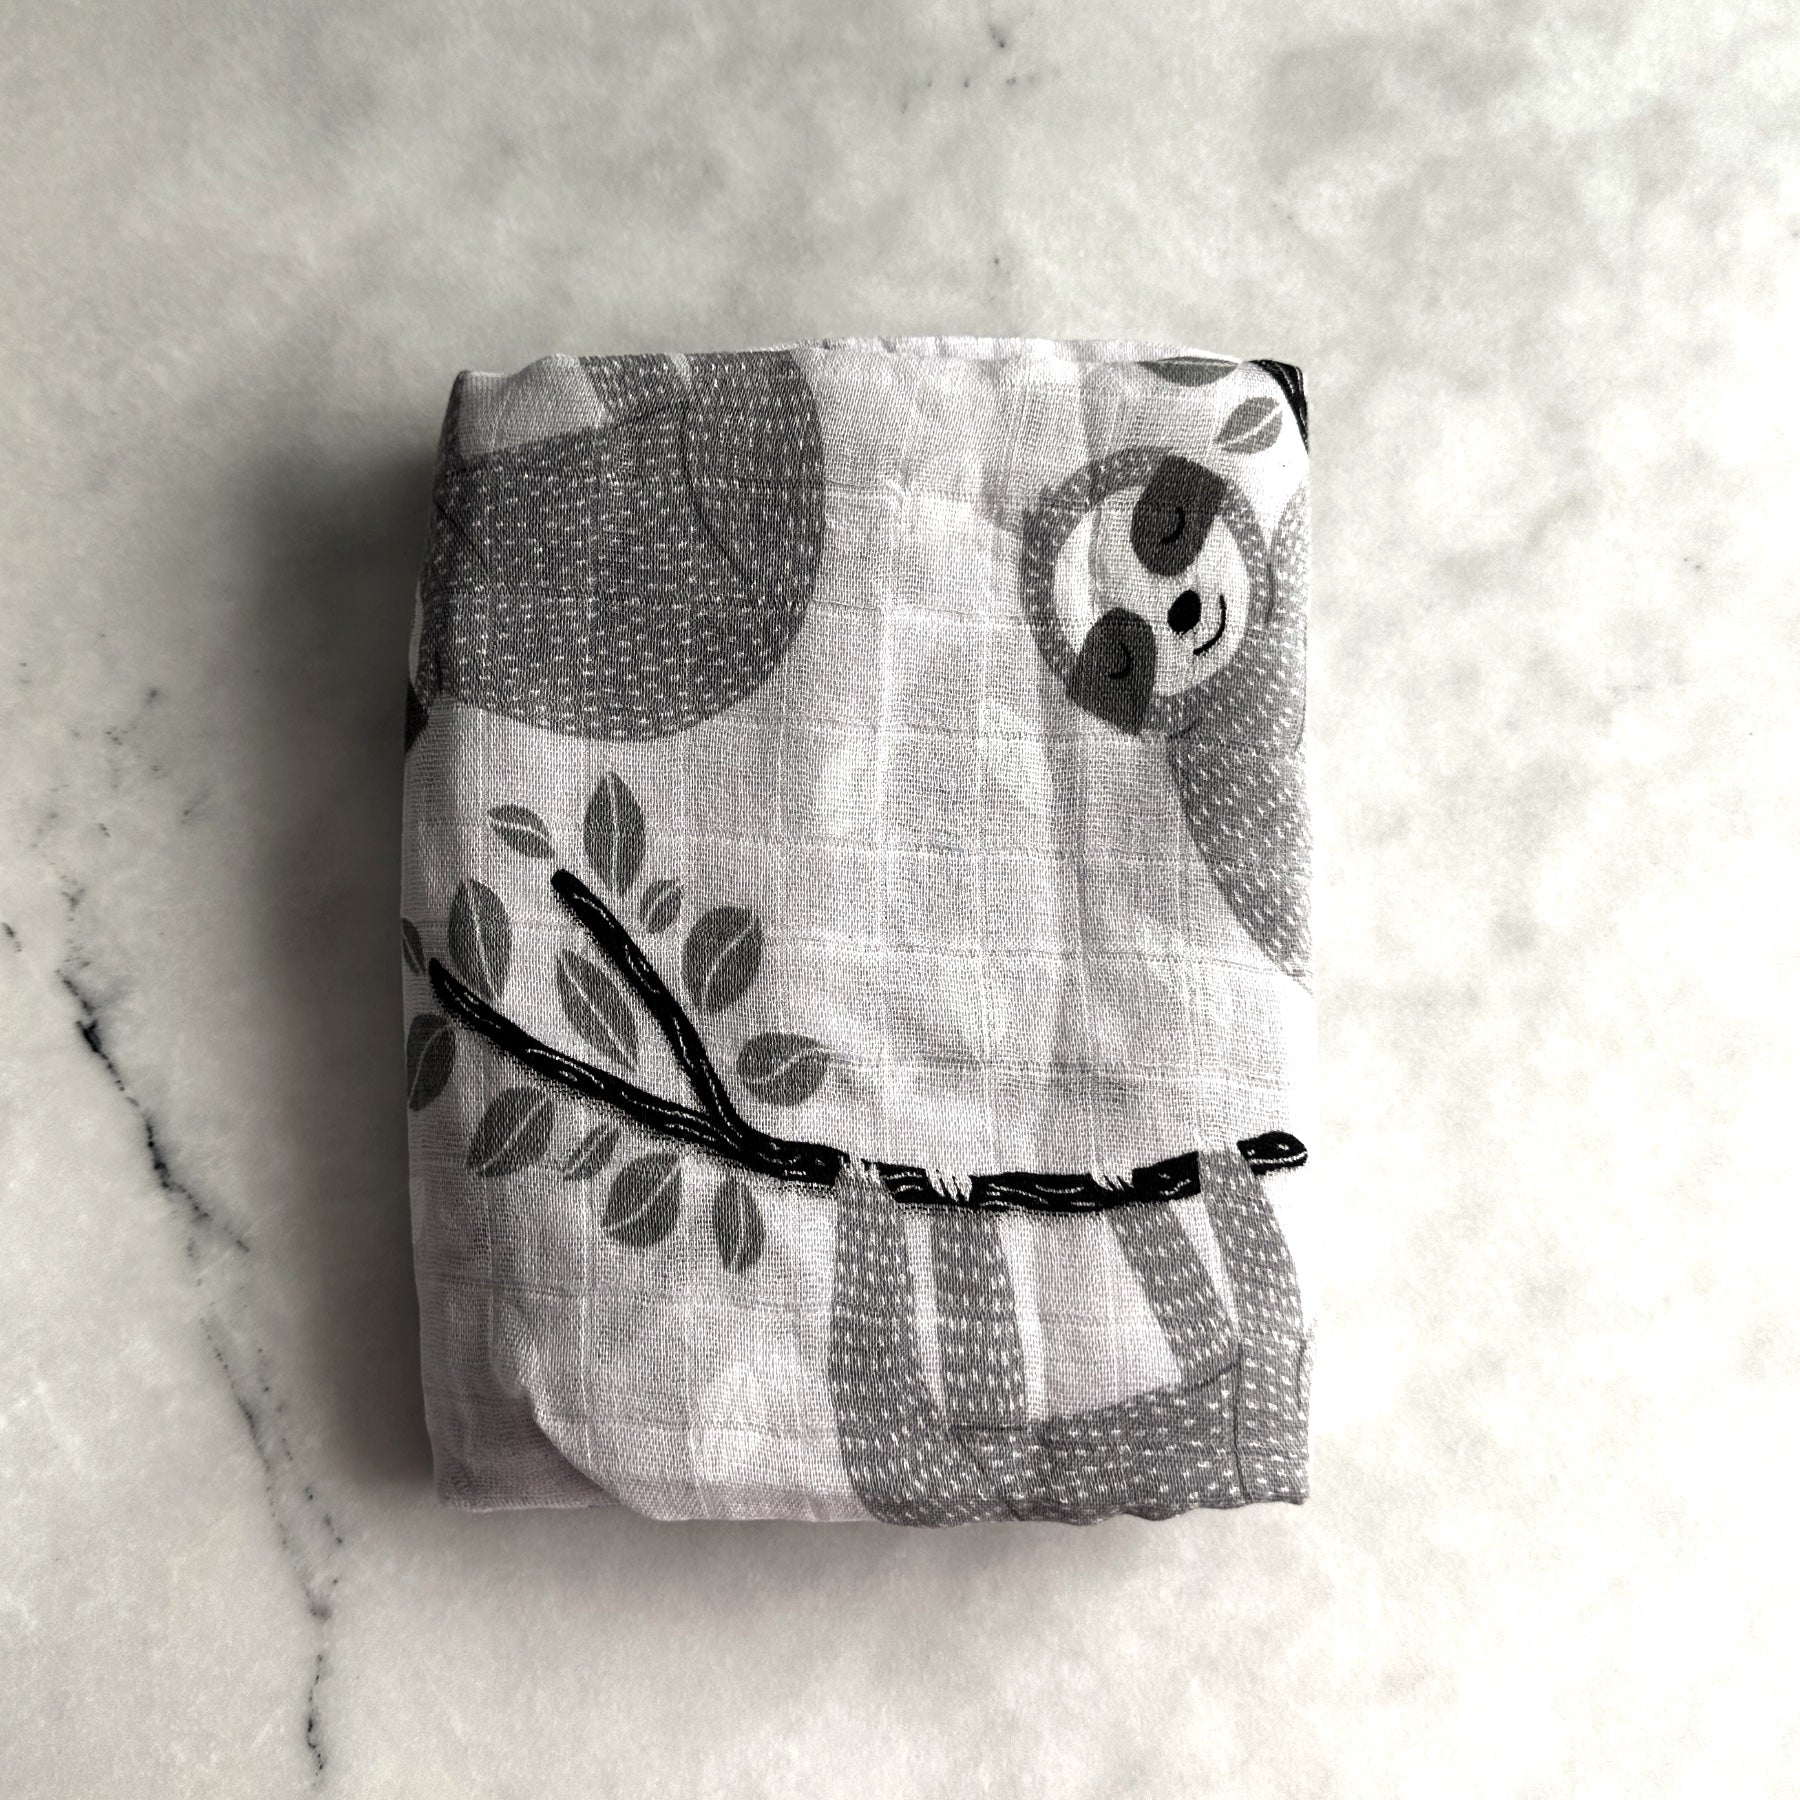 Sleepy Sloth Swaddle - Baby Swaddles at Louie Meets Lola